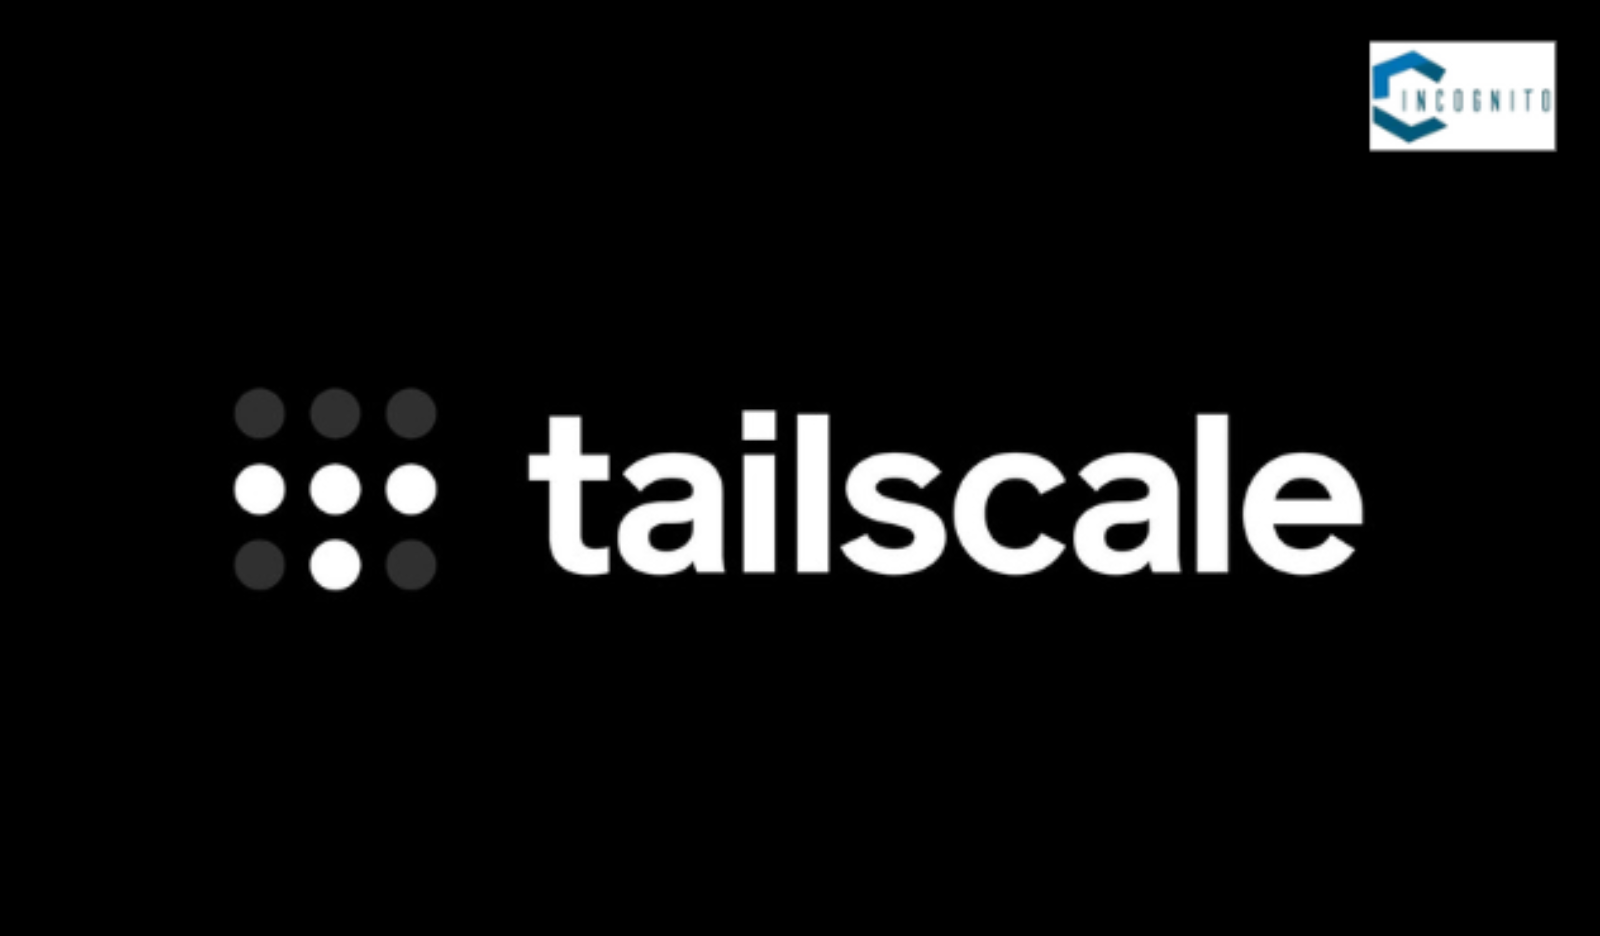 Tailscale: Get Secure and Streamlined Network